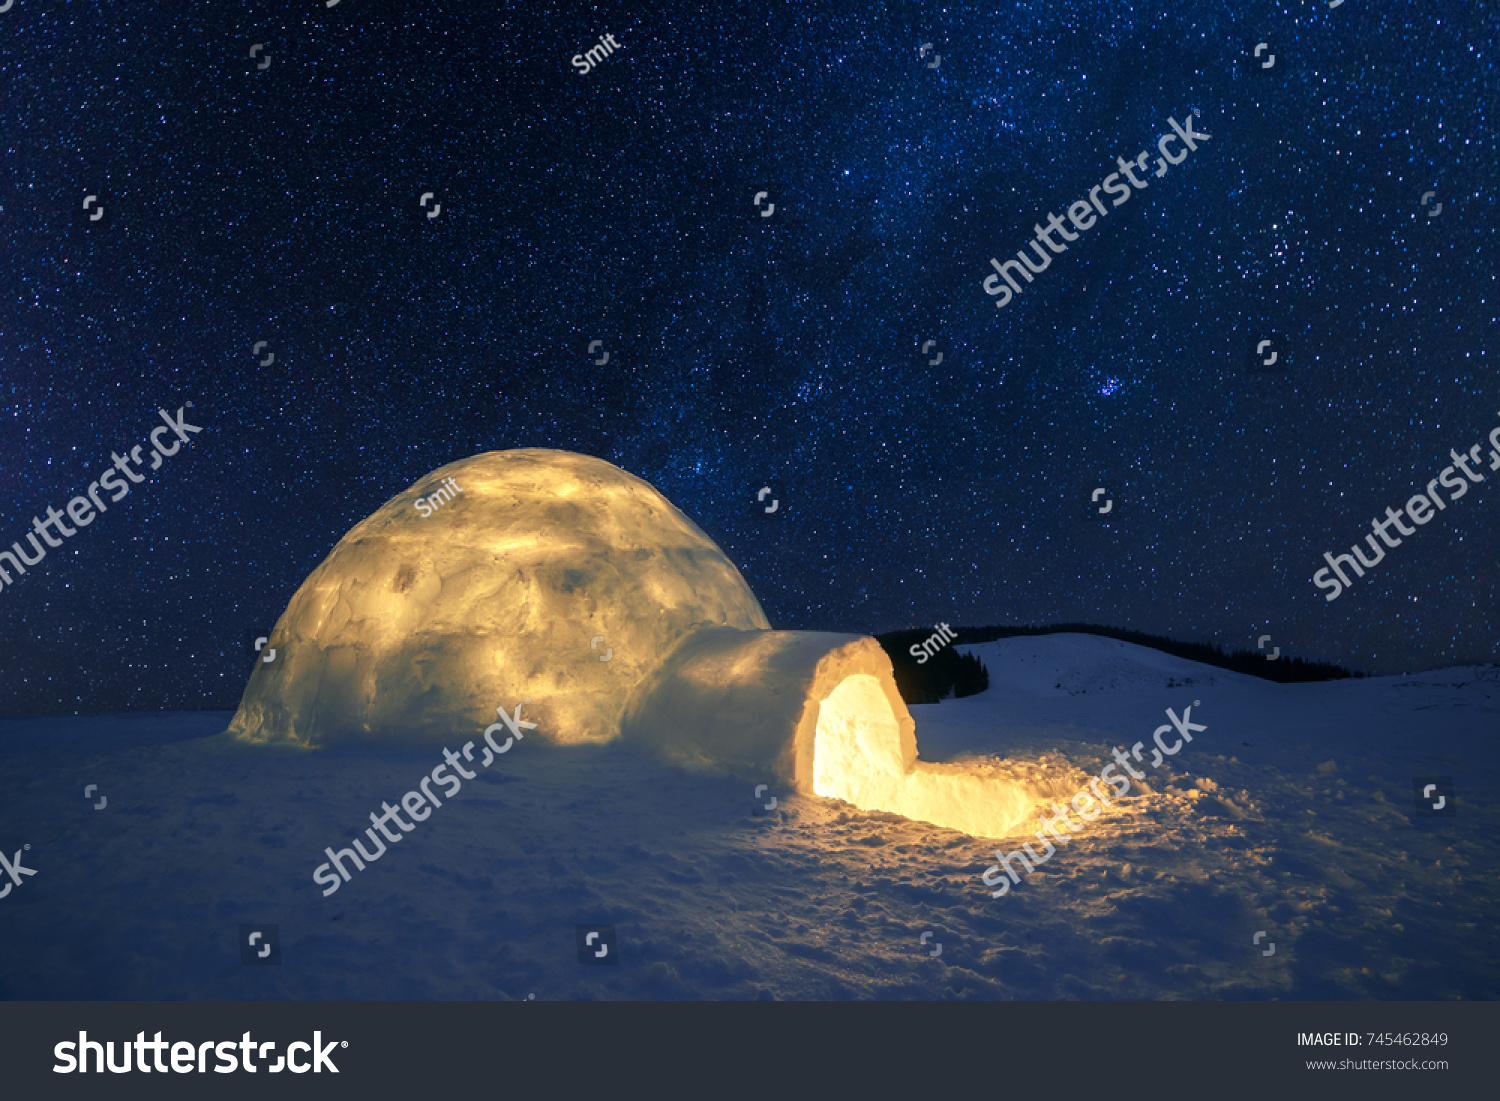 Fantastic winter landscape glowing by star light. Wintry scene with snowy igloo and milky way in night sky. Carpathian mountains. Santa house from snow,  ideal New Year and Christmas background  #745462849